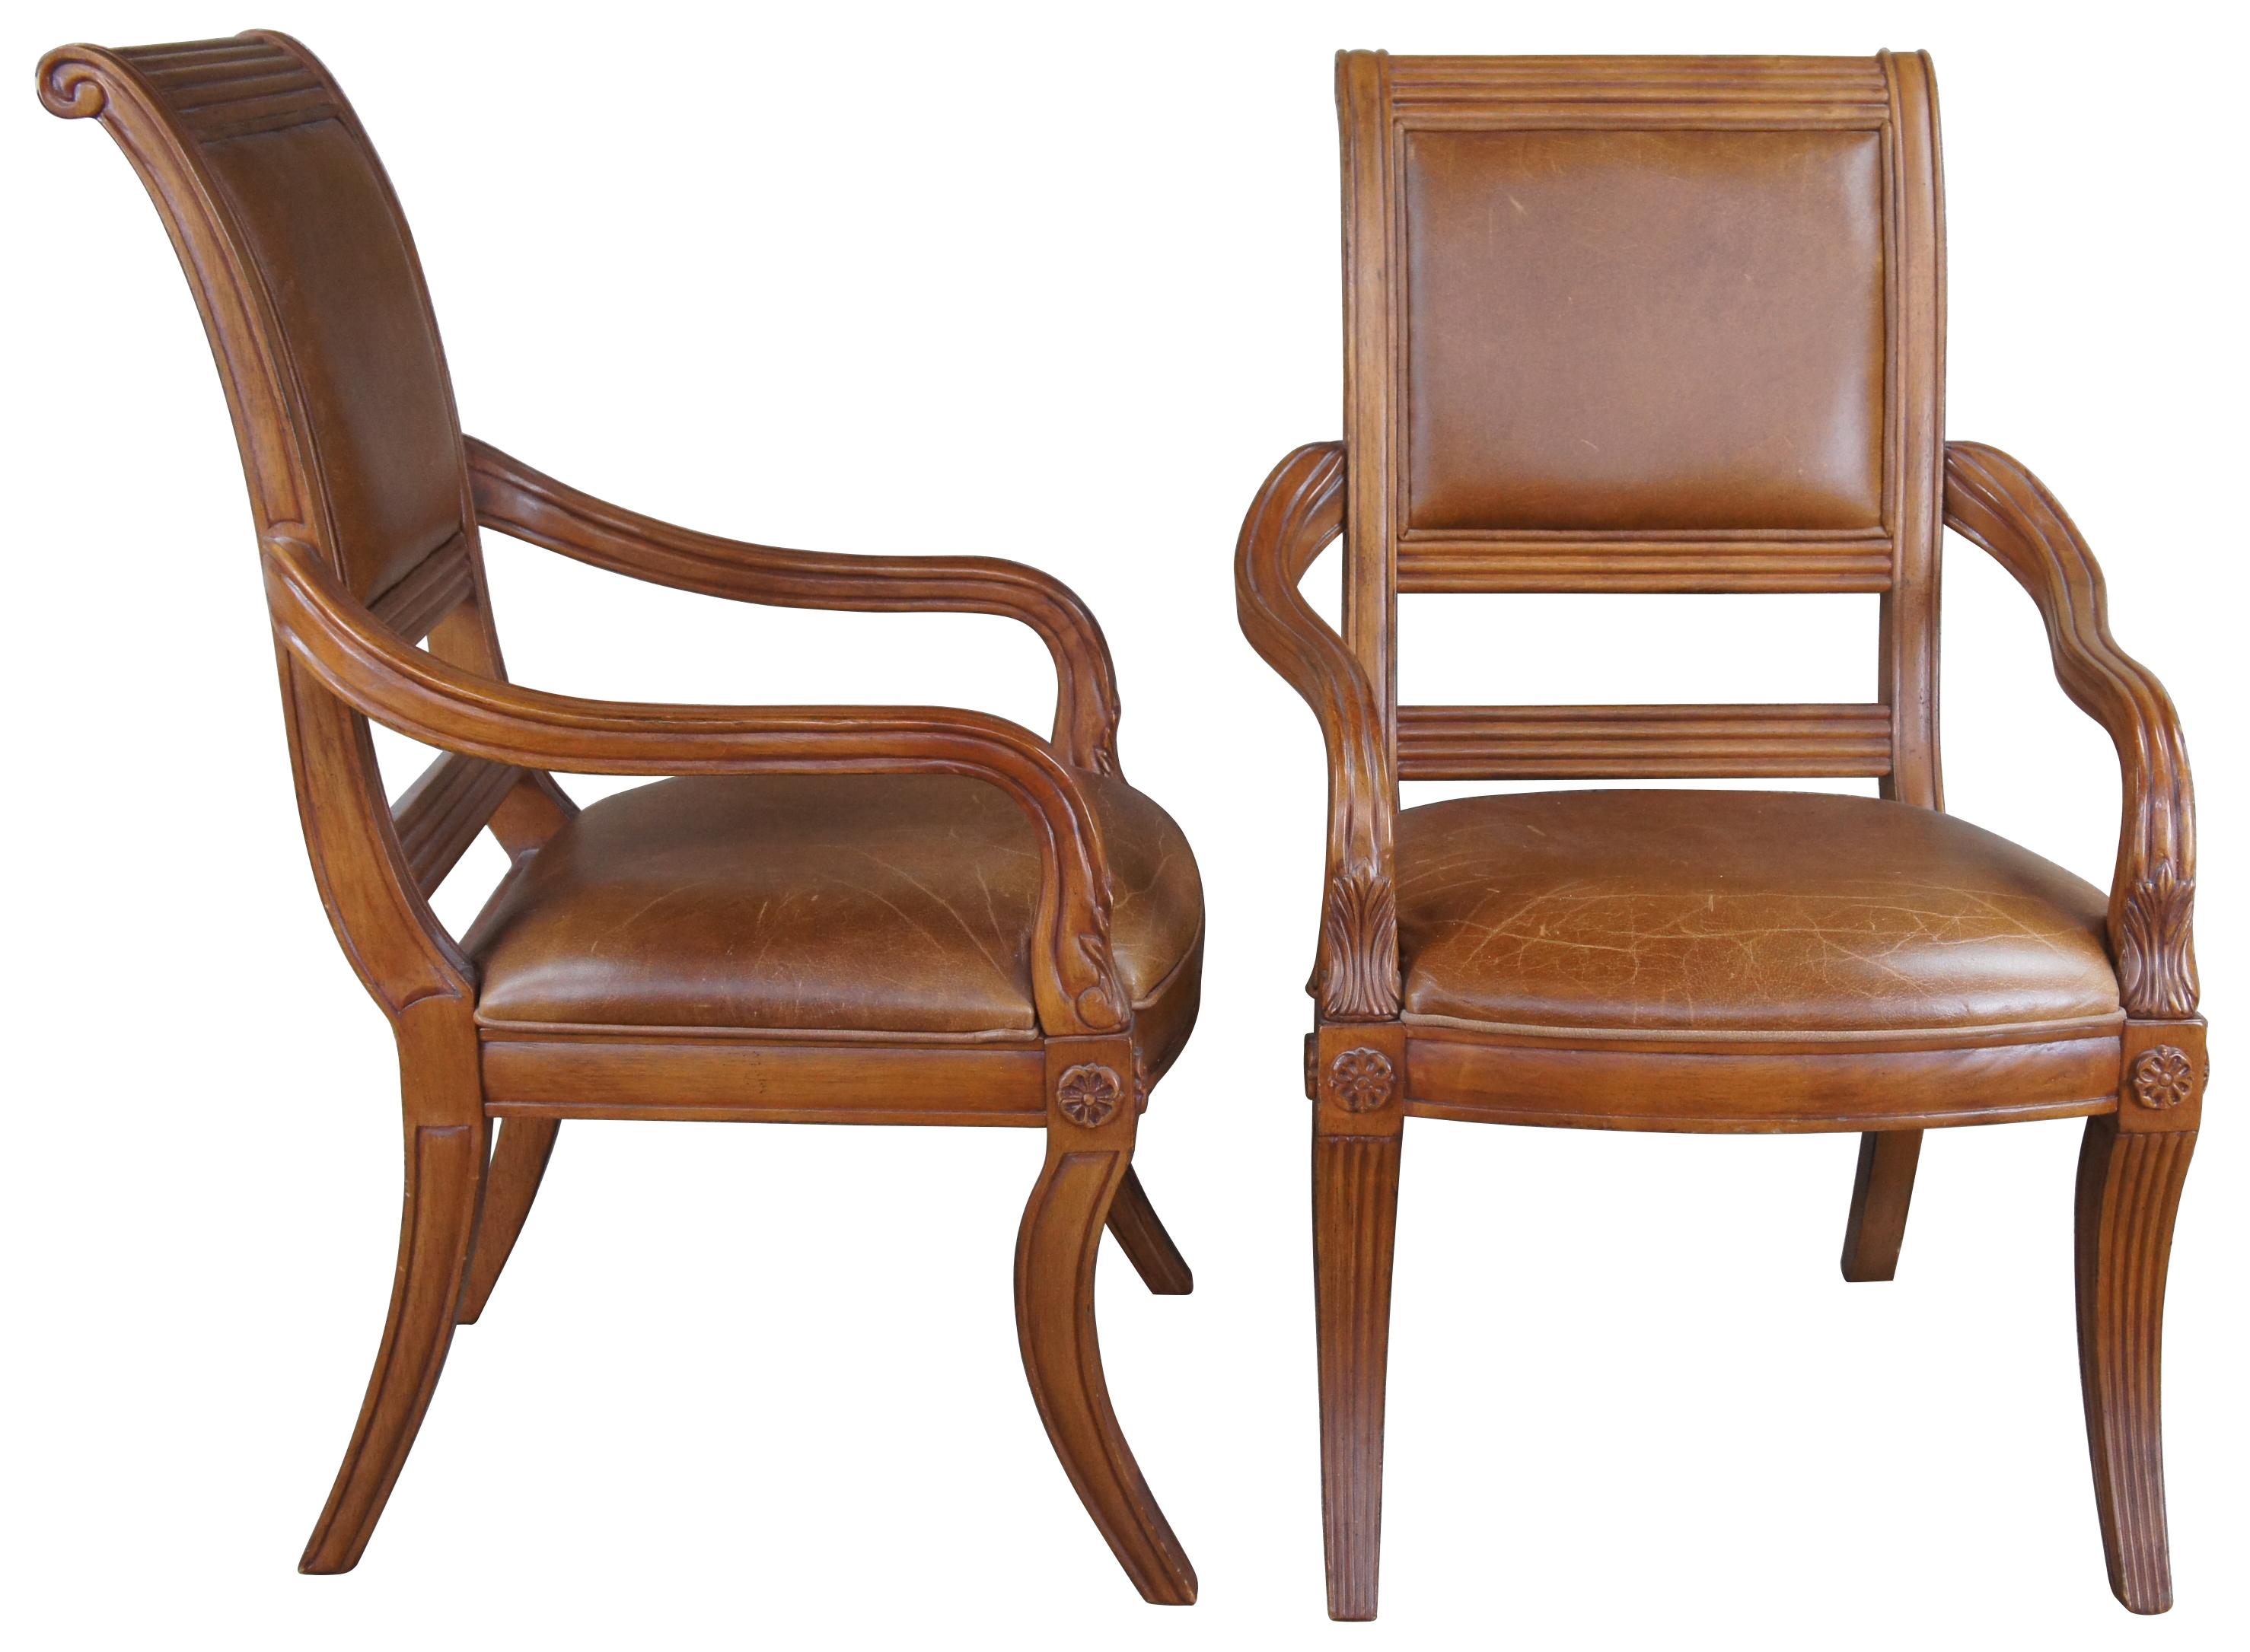 A lovely pair of chairs by Bernhardt Furniture Company. Drawing inspiration from Empire, Regency and Neoclassical styling. Hardwood frames with brown leather upholstery. Features a scrolled back with carved wreath design along the back, medallions,